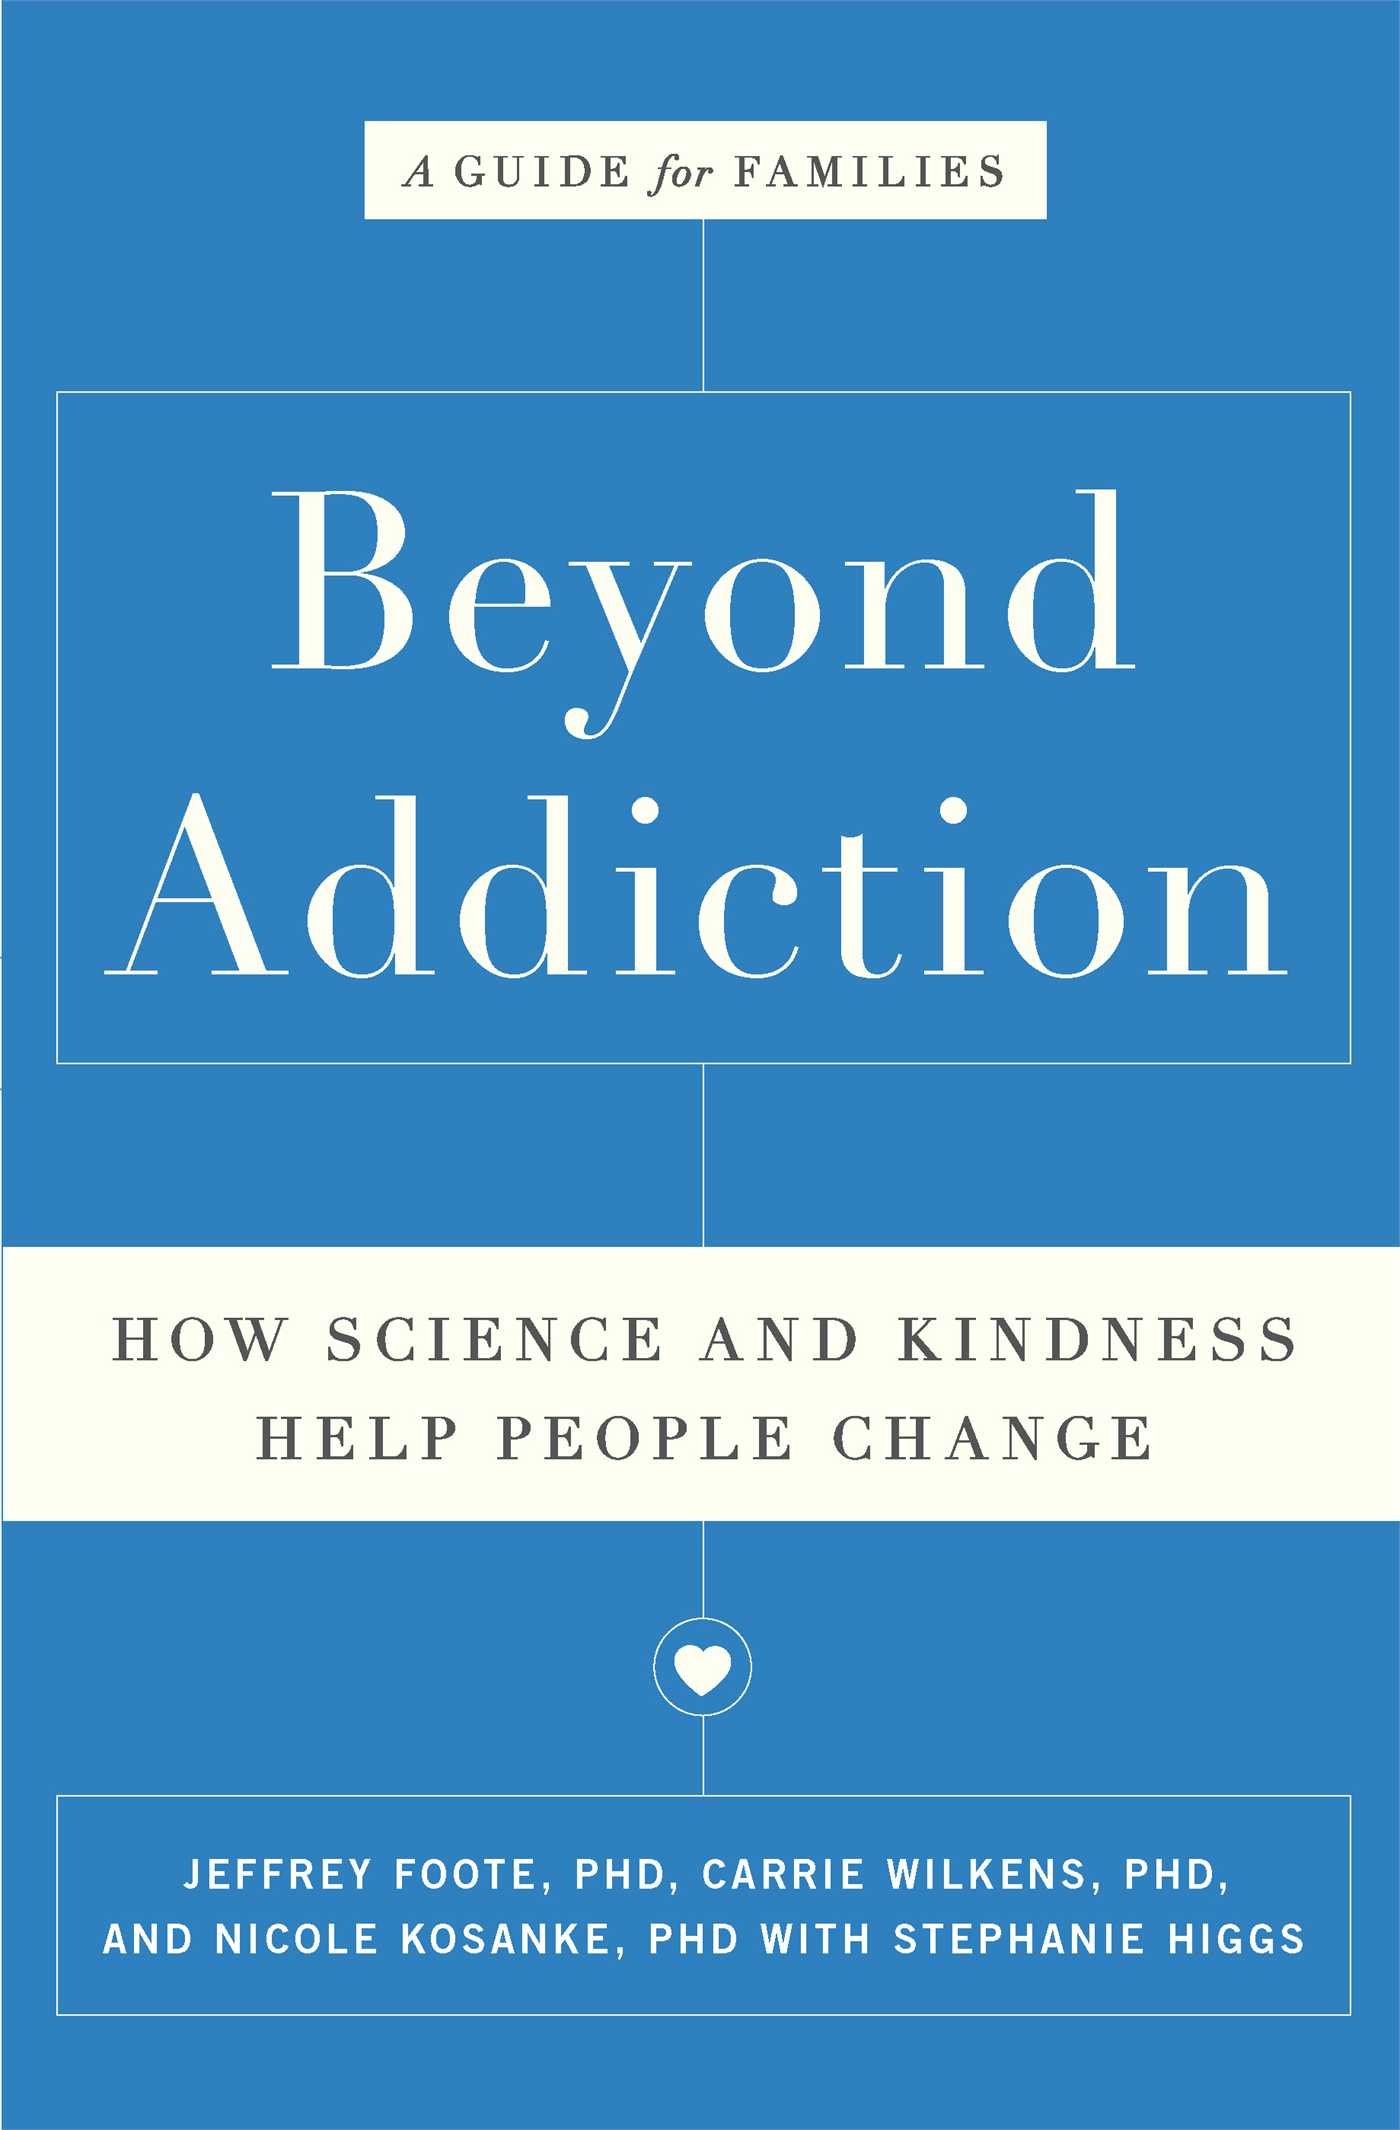 Beyond Addiction book cover